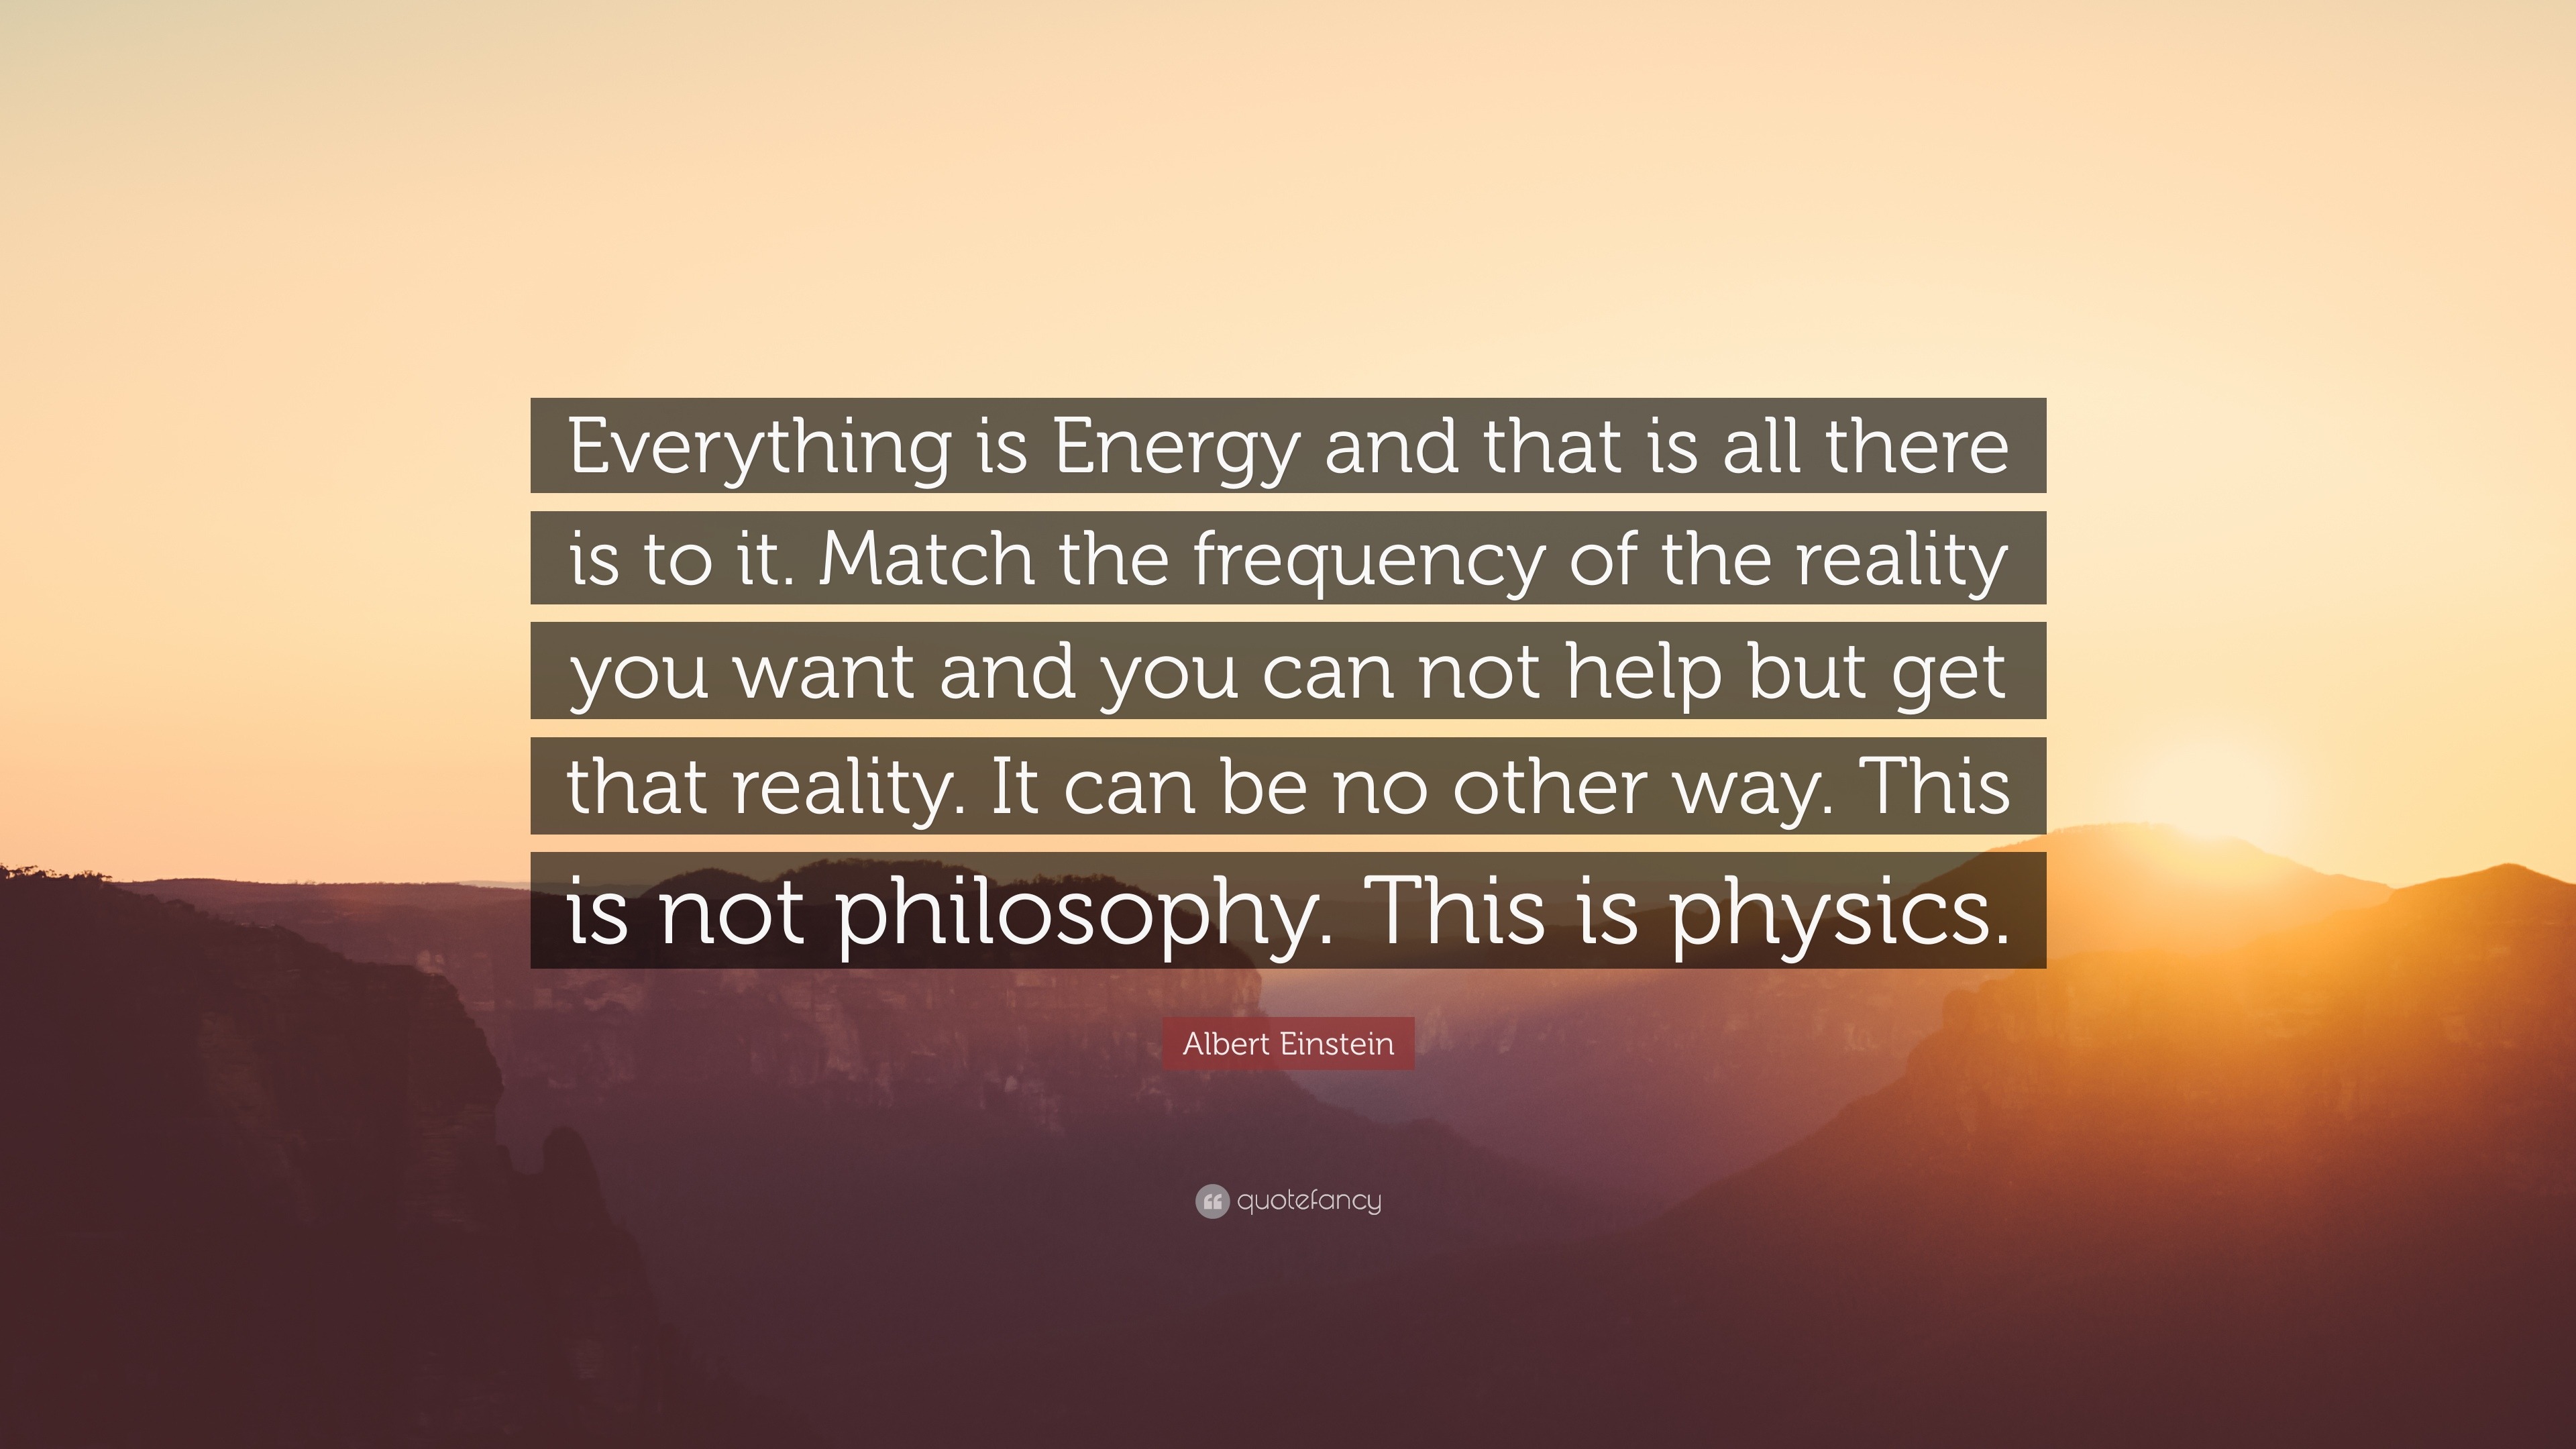 Albert Einstein Quote: “Everything is Energy and that is all there is ...
 Energy Physics Quotes